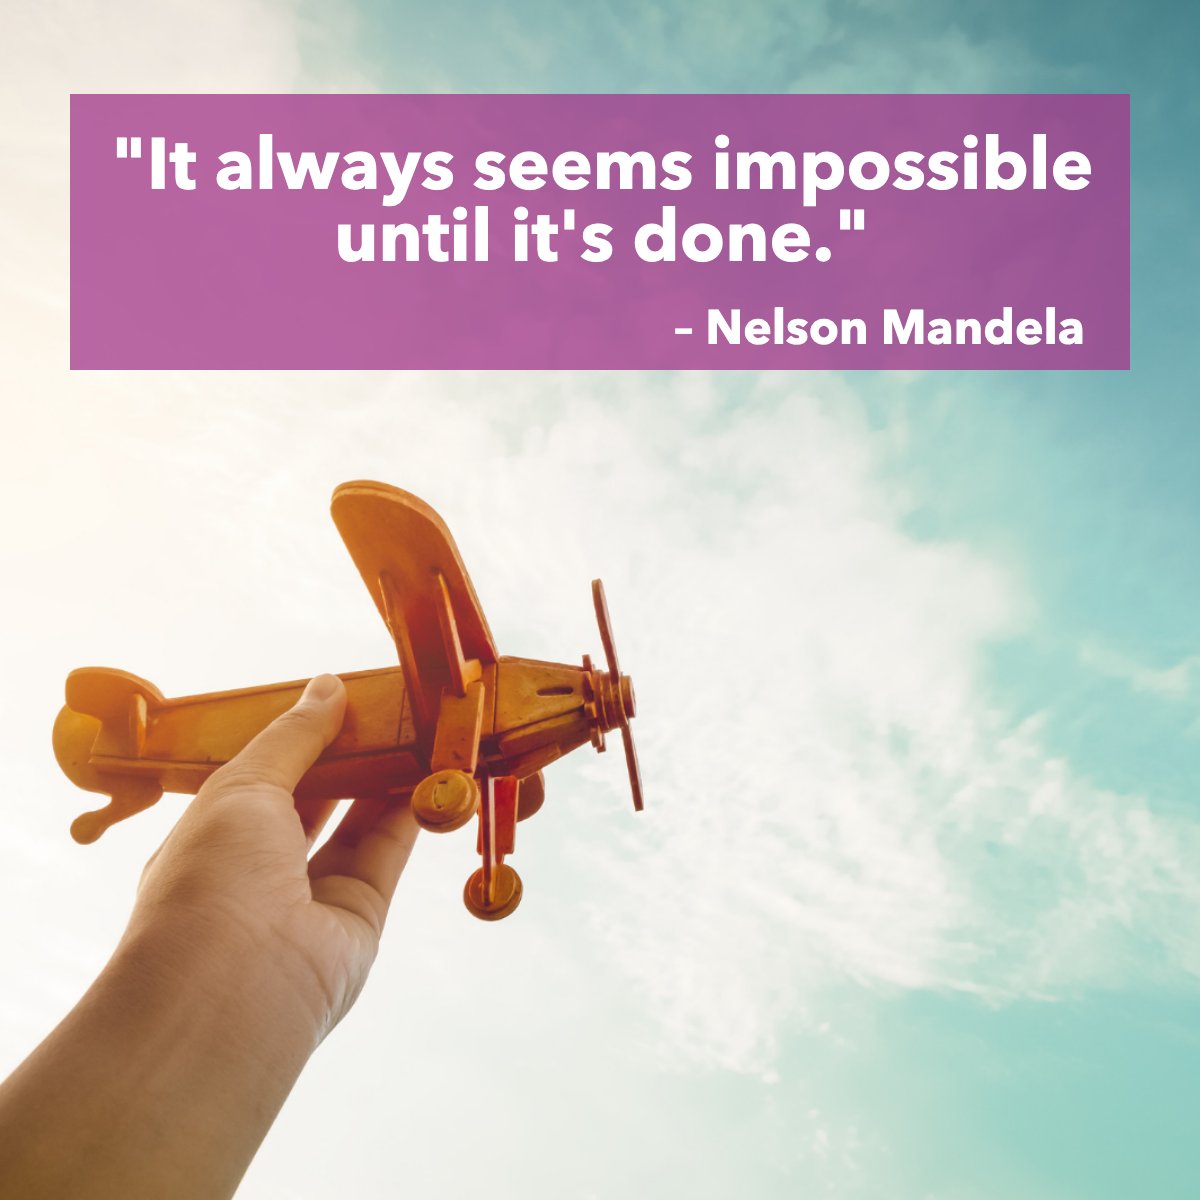 'It always seems impossible until it's done.' 
– Nelson Mandela

What big things are you taking on this week?

#airplane #toyairplane #impossible #fly #quote #inspirational #sky #nelsonmandela
 #SandyRuizRealtor #azrealestate #westusarealty #arizonarealtor